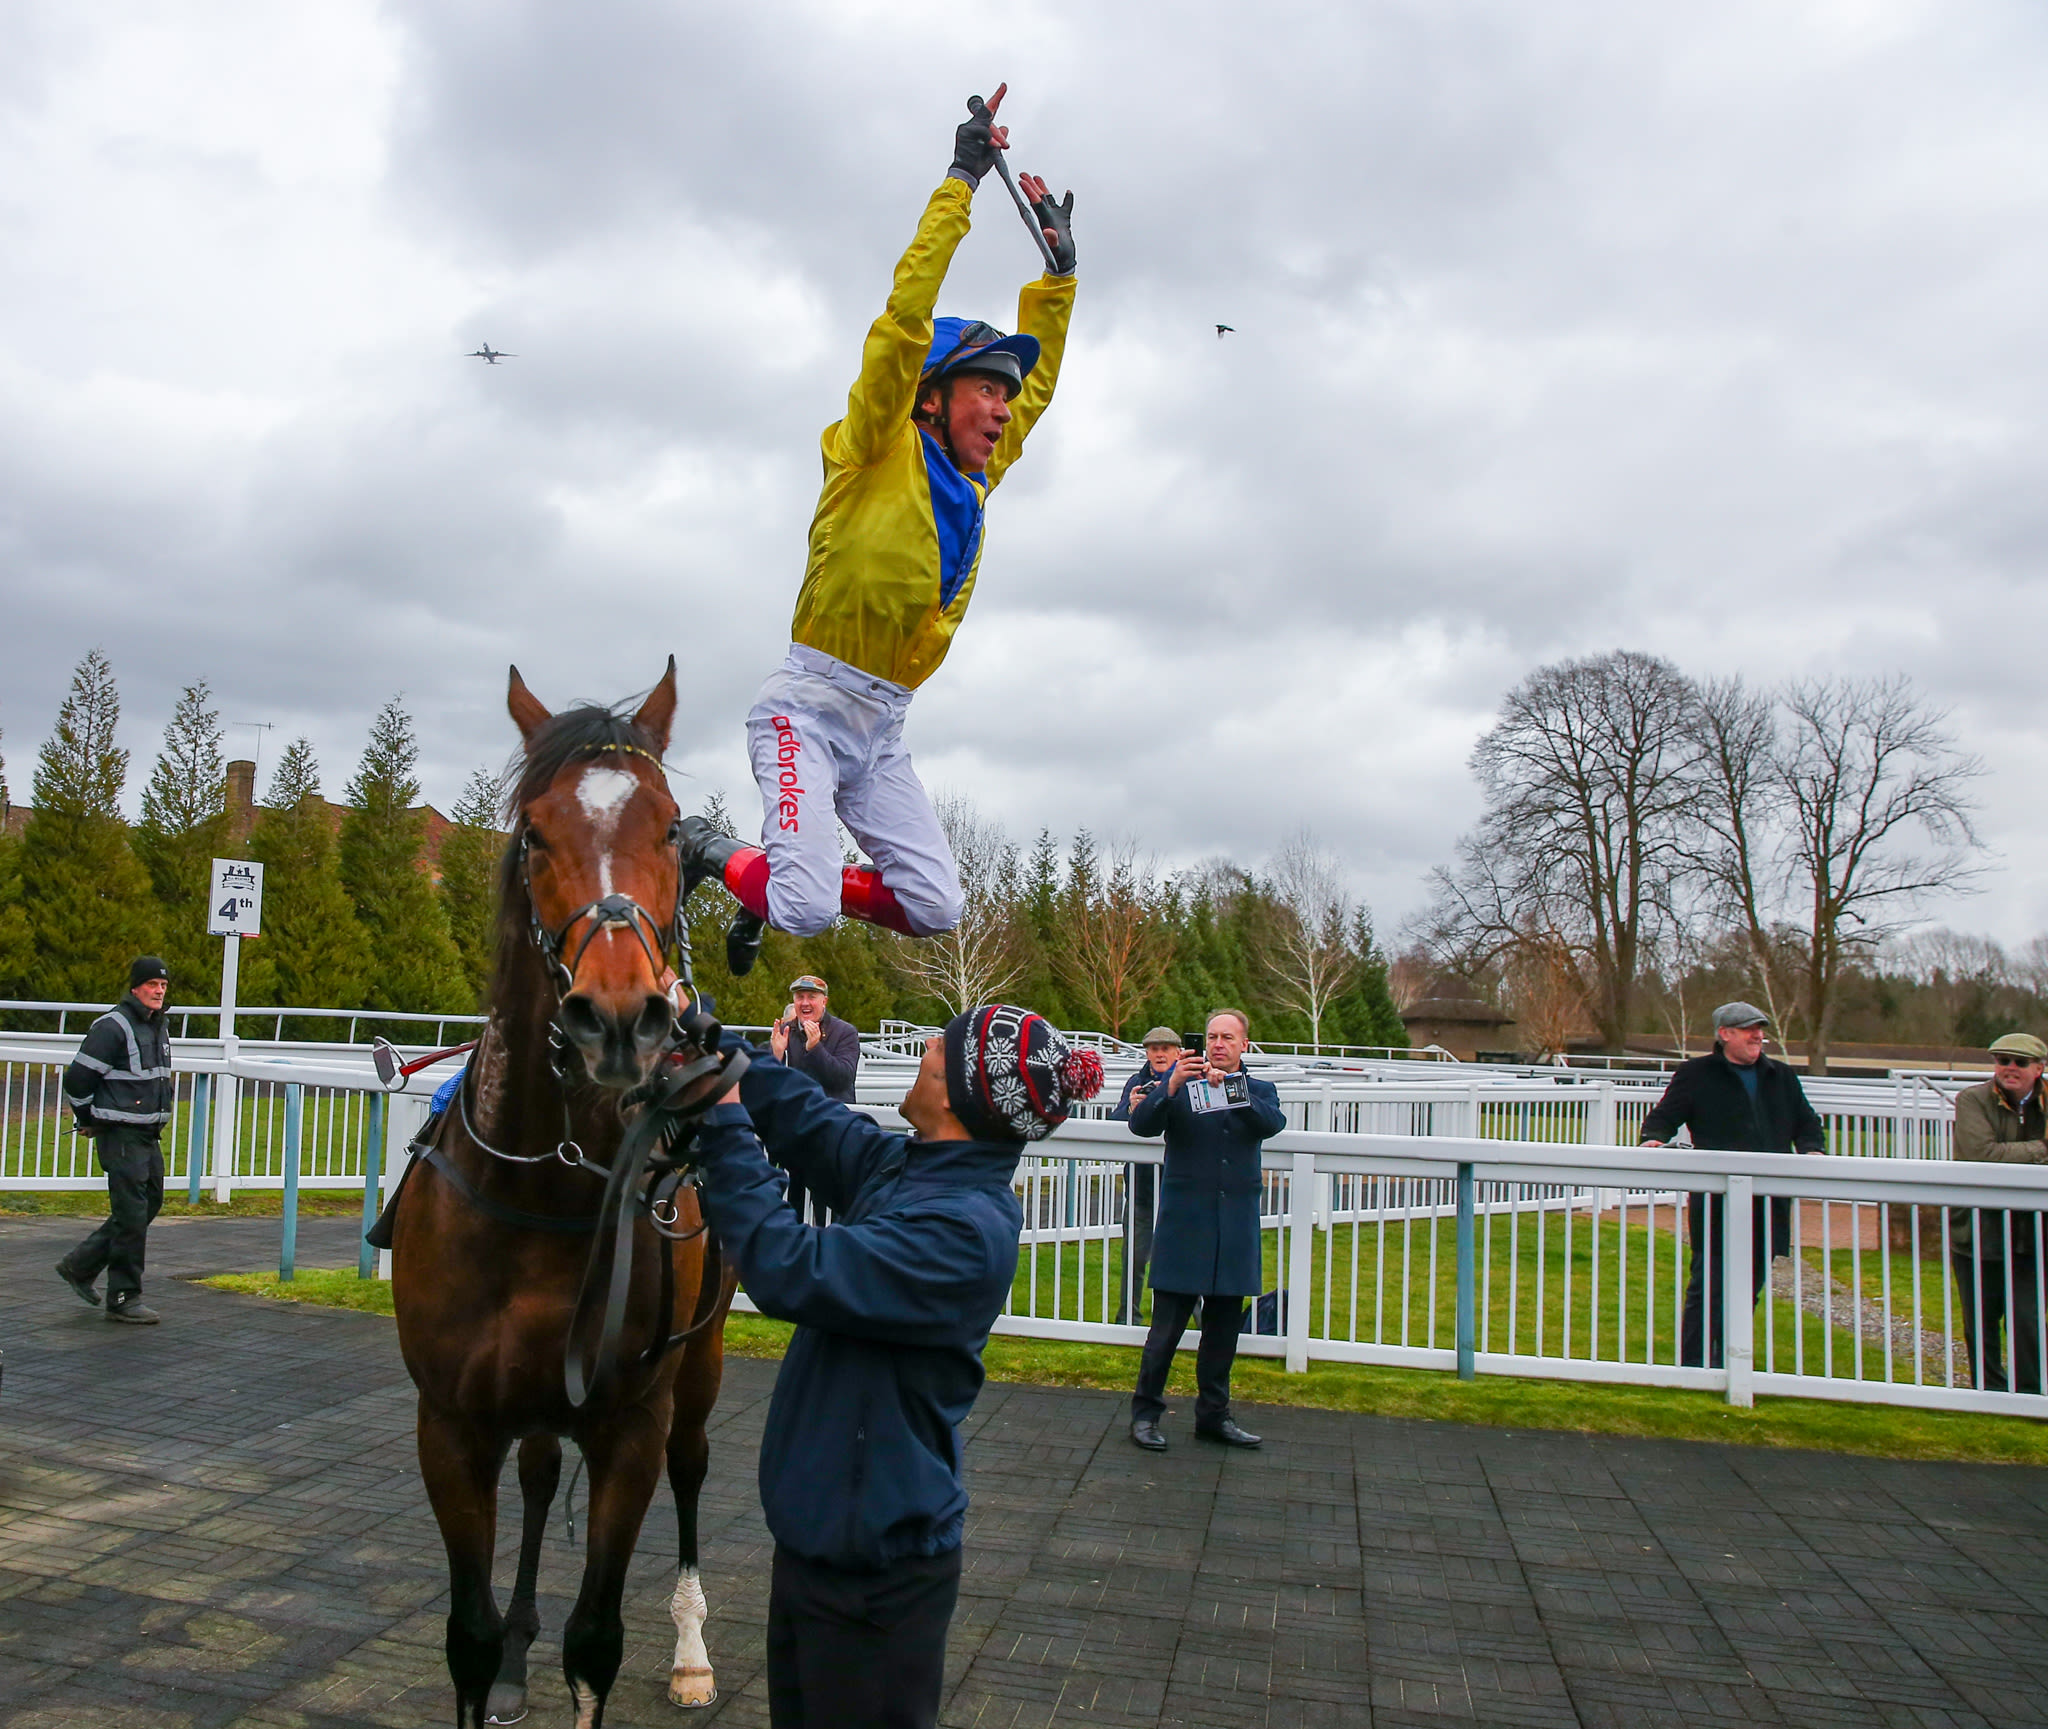 Racegoers were treated to a flying dismount from Frankie Dettori at Lingfield on Saturday (Focusonracing)